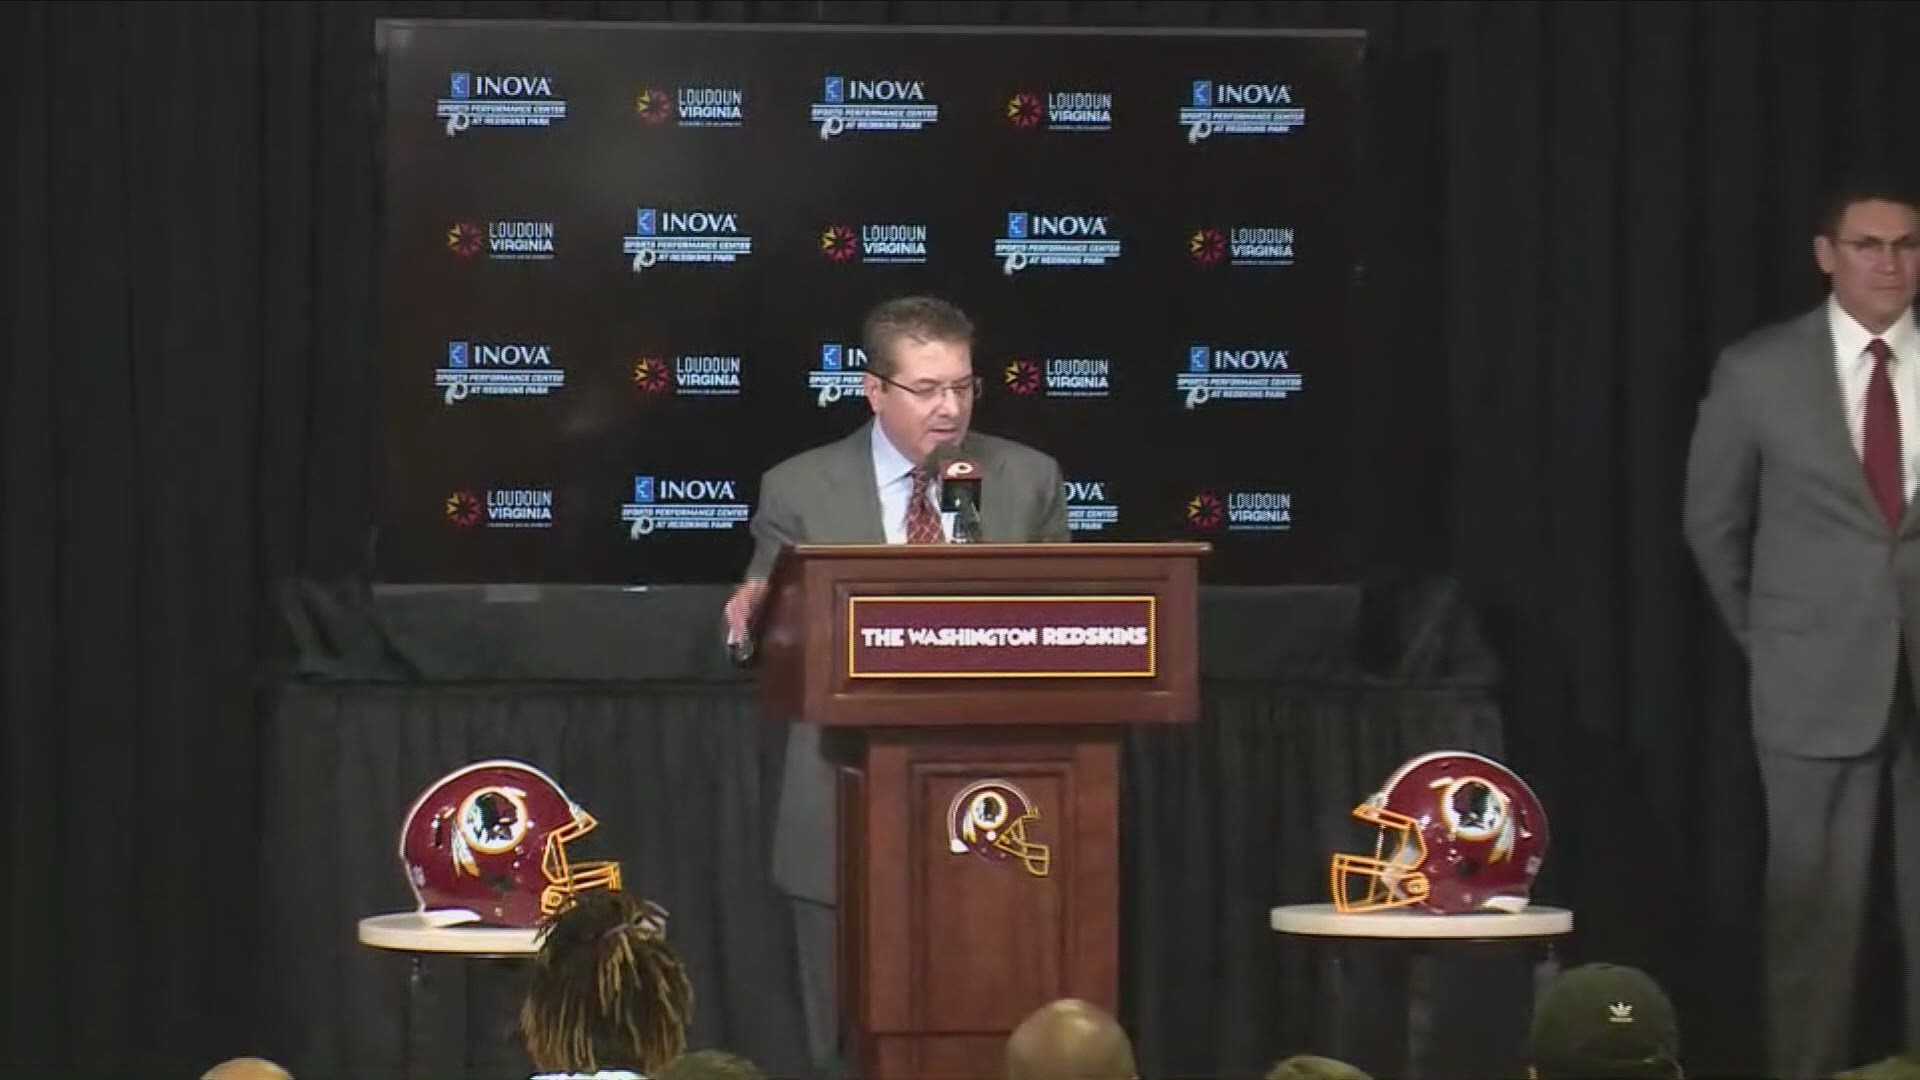 "First off, happy Thanksgiving everybody." -- Redskins owner Dan Snyder on January 2nd, 2020.